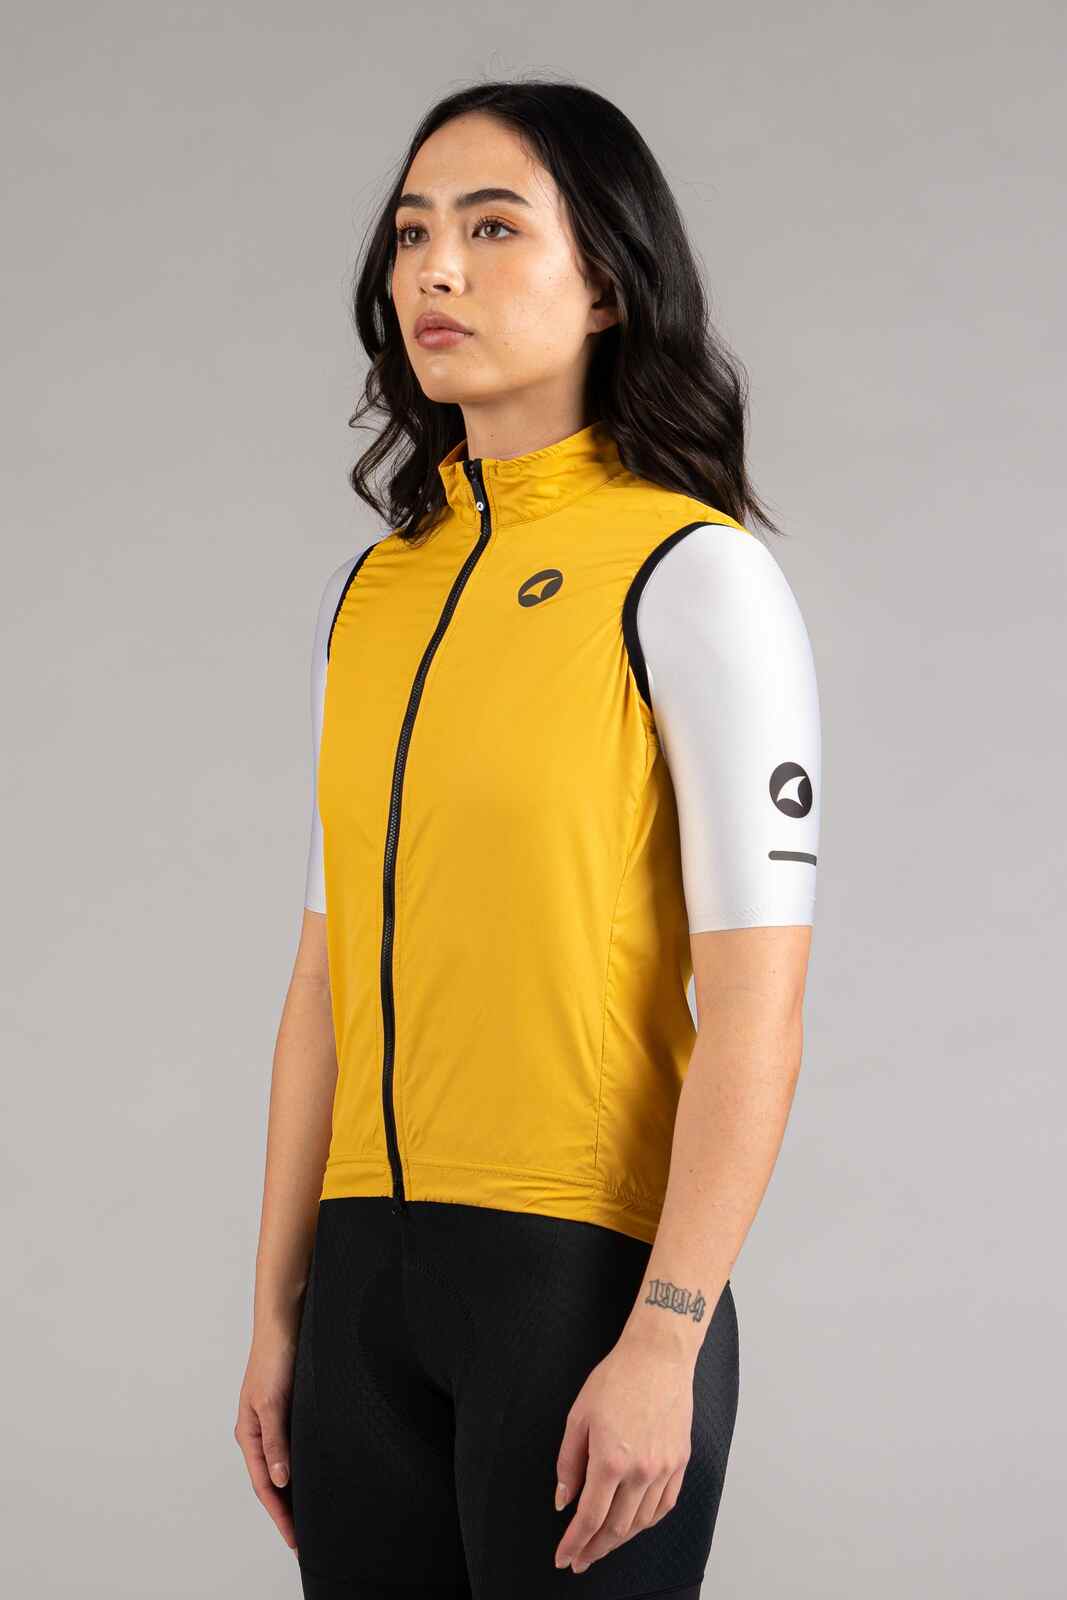 Women's Golden Yellow Packable Cycling Wind Vest - Front View